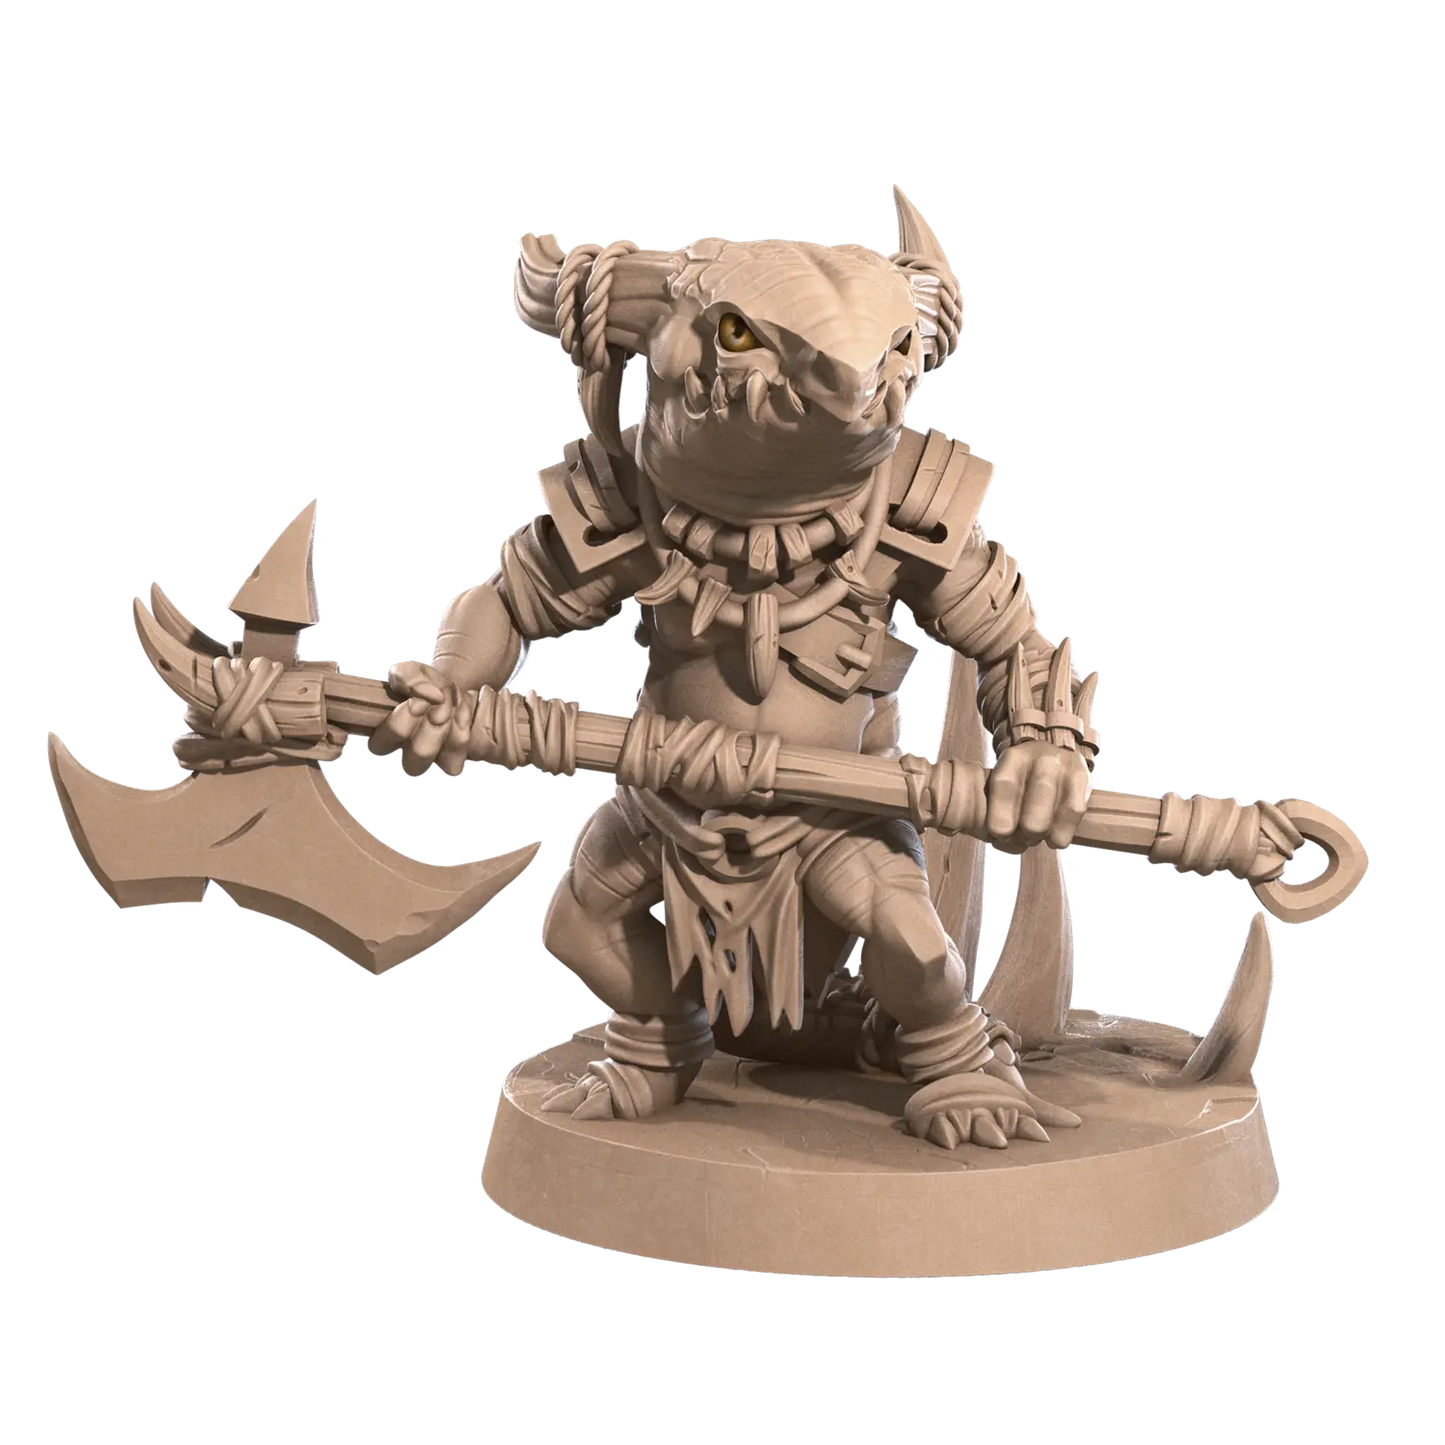 DnD Barbarian - Fighter - Kobold - Miniature - Monsters Vex  Barbarian - Fighter - Kobold - Miniature - Monsters sold by DoubleHitShop